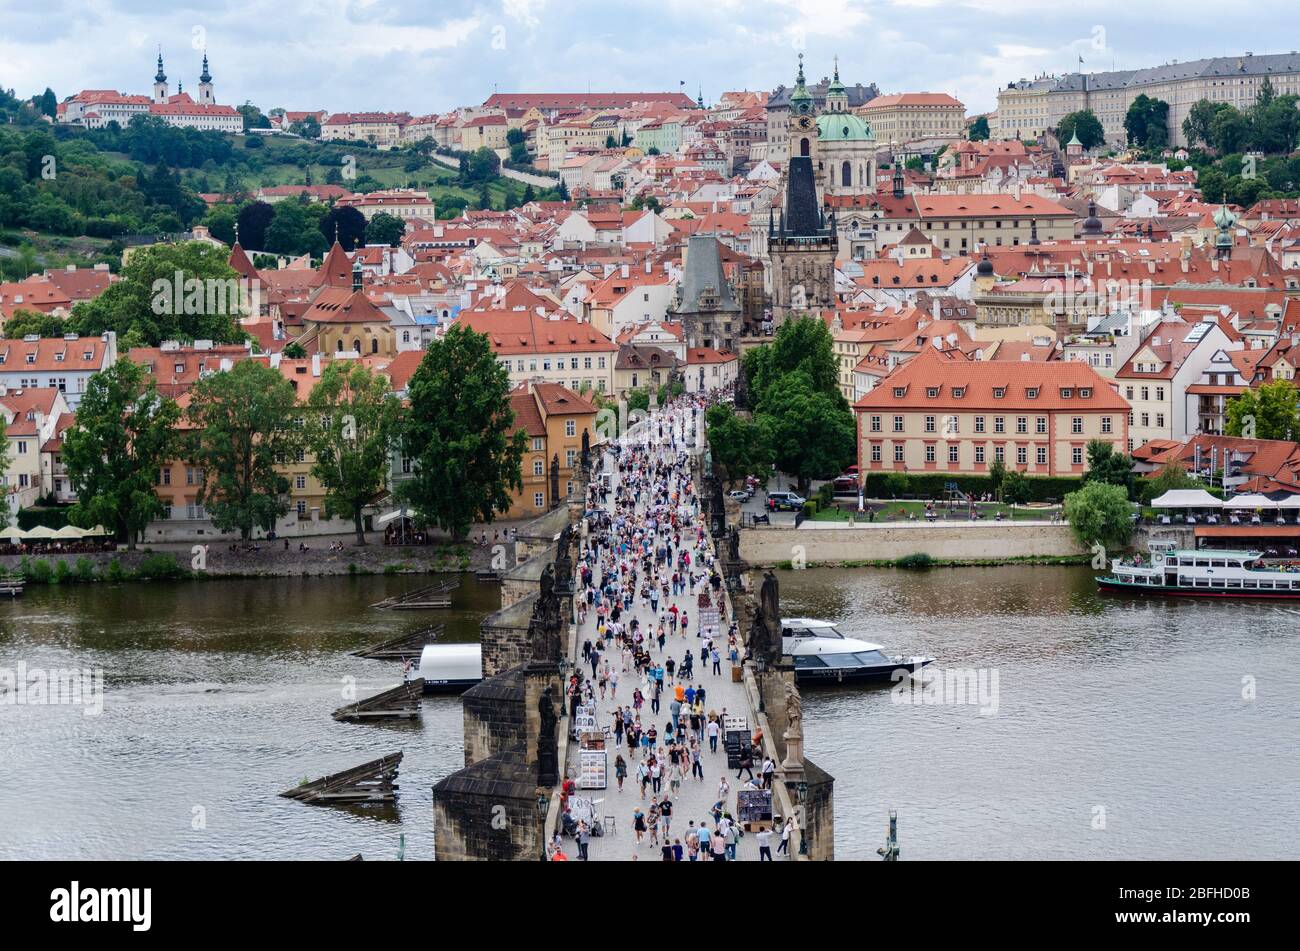 Tourists flocking the Charles Bridge and Malá Strana seen on the opposite side of the bridge from Old Town Bridge Tower, Prague, Czech Republic Stock Photo